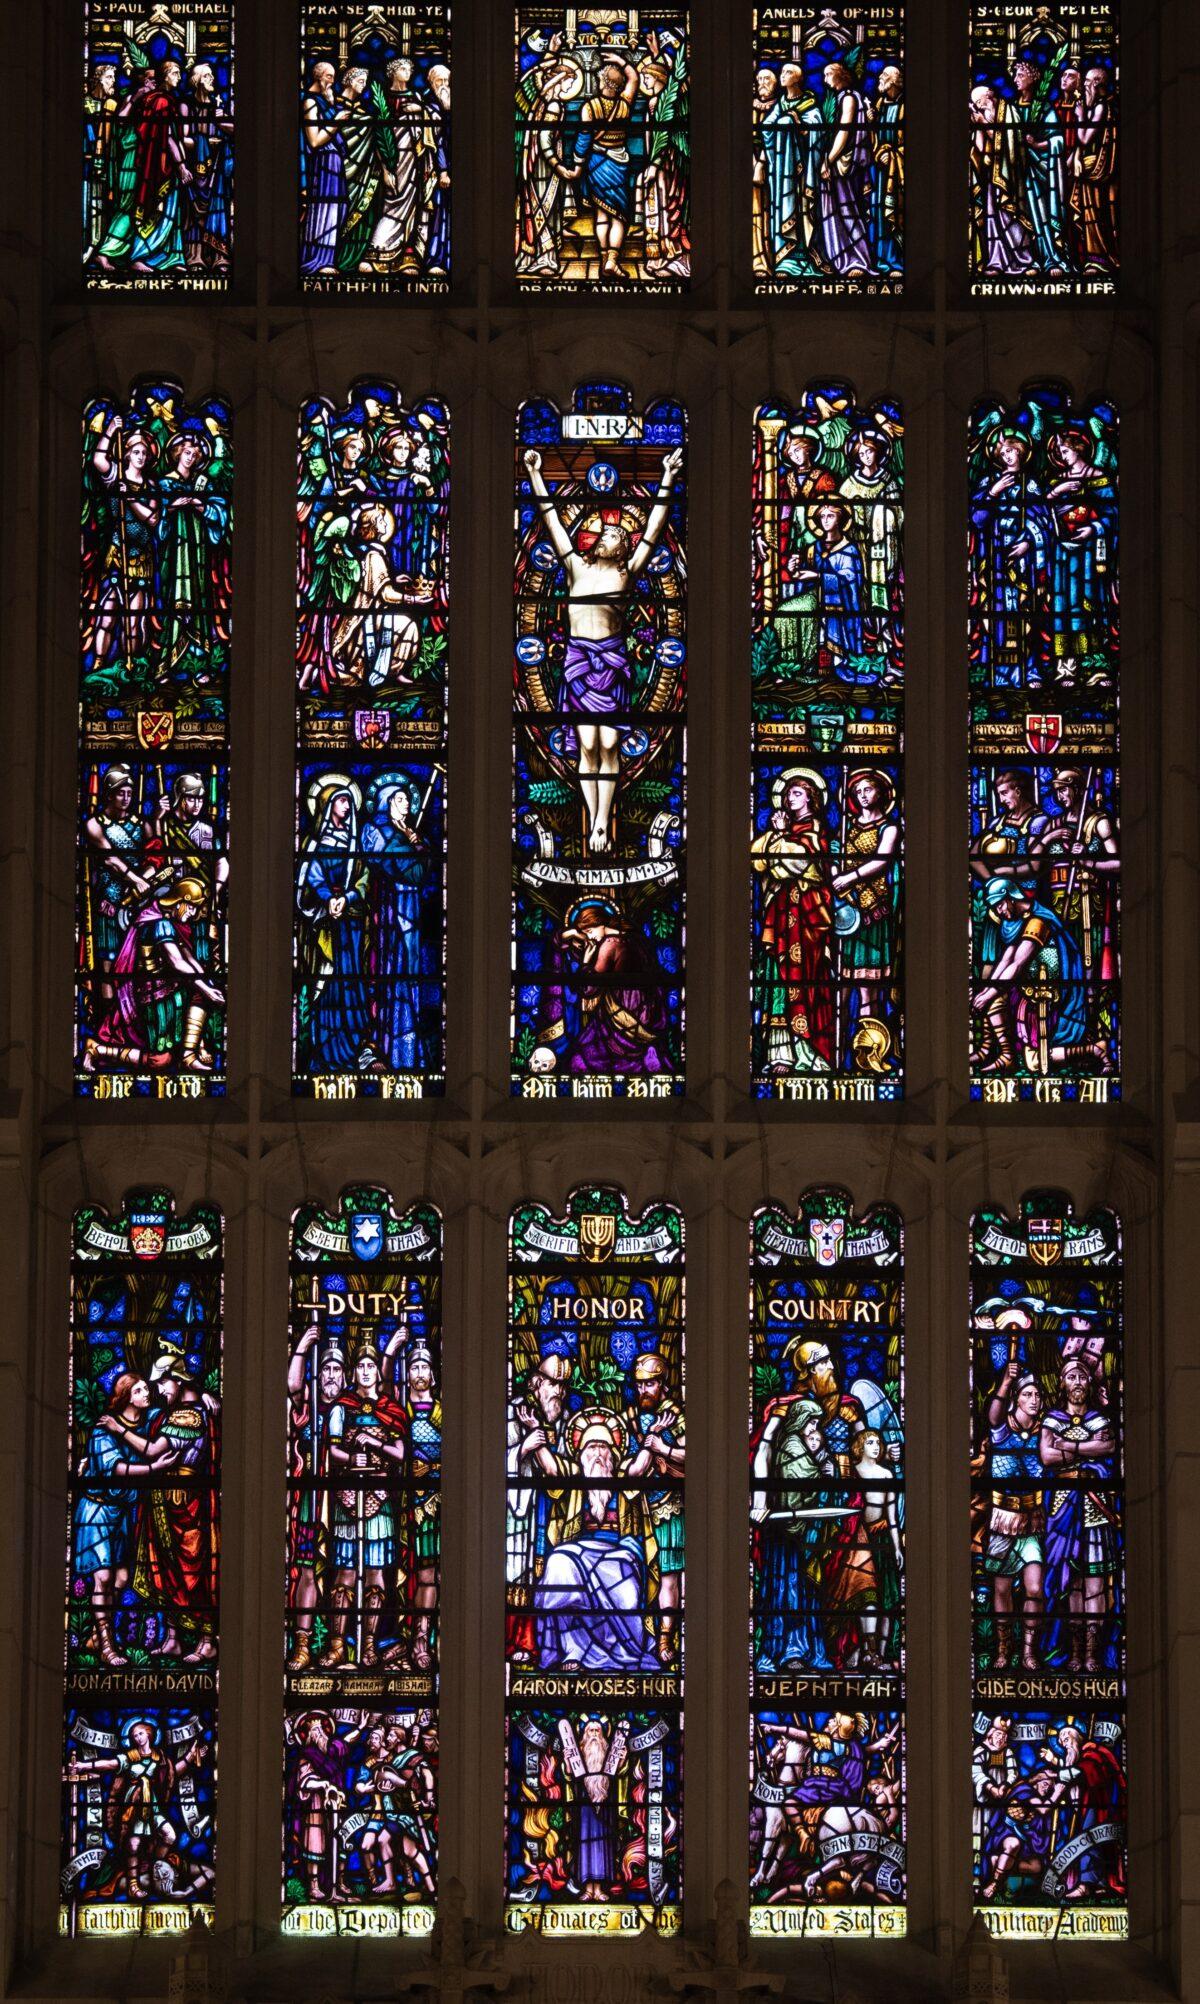 Stained glass windows at the Cadet Chapel in West Point, N.Y., on Feb. 12, 2023. (Samira Bouaou/The Epoch Times)